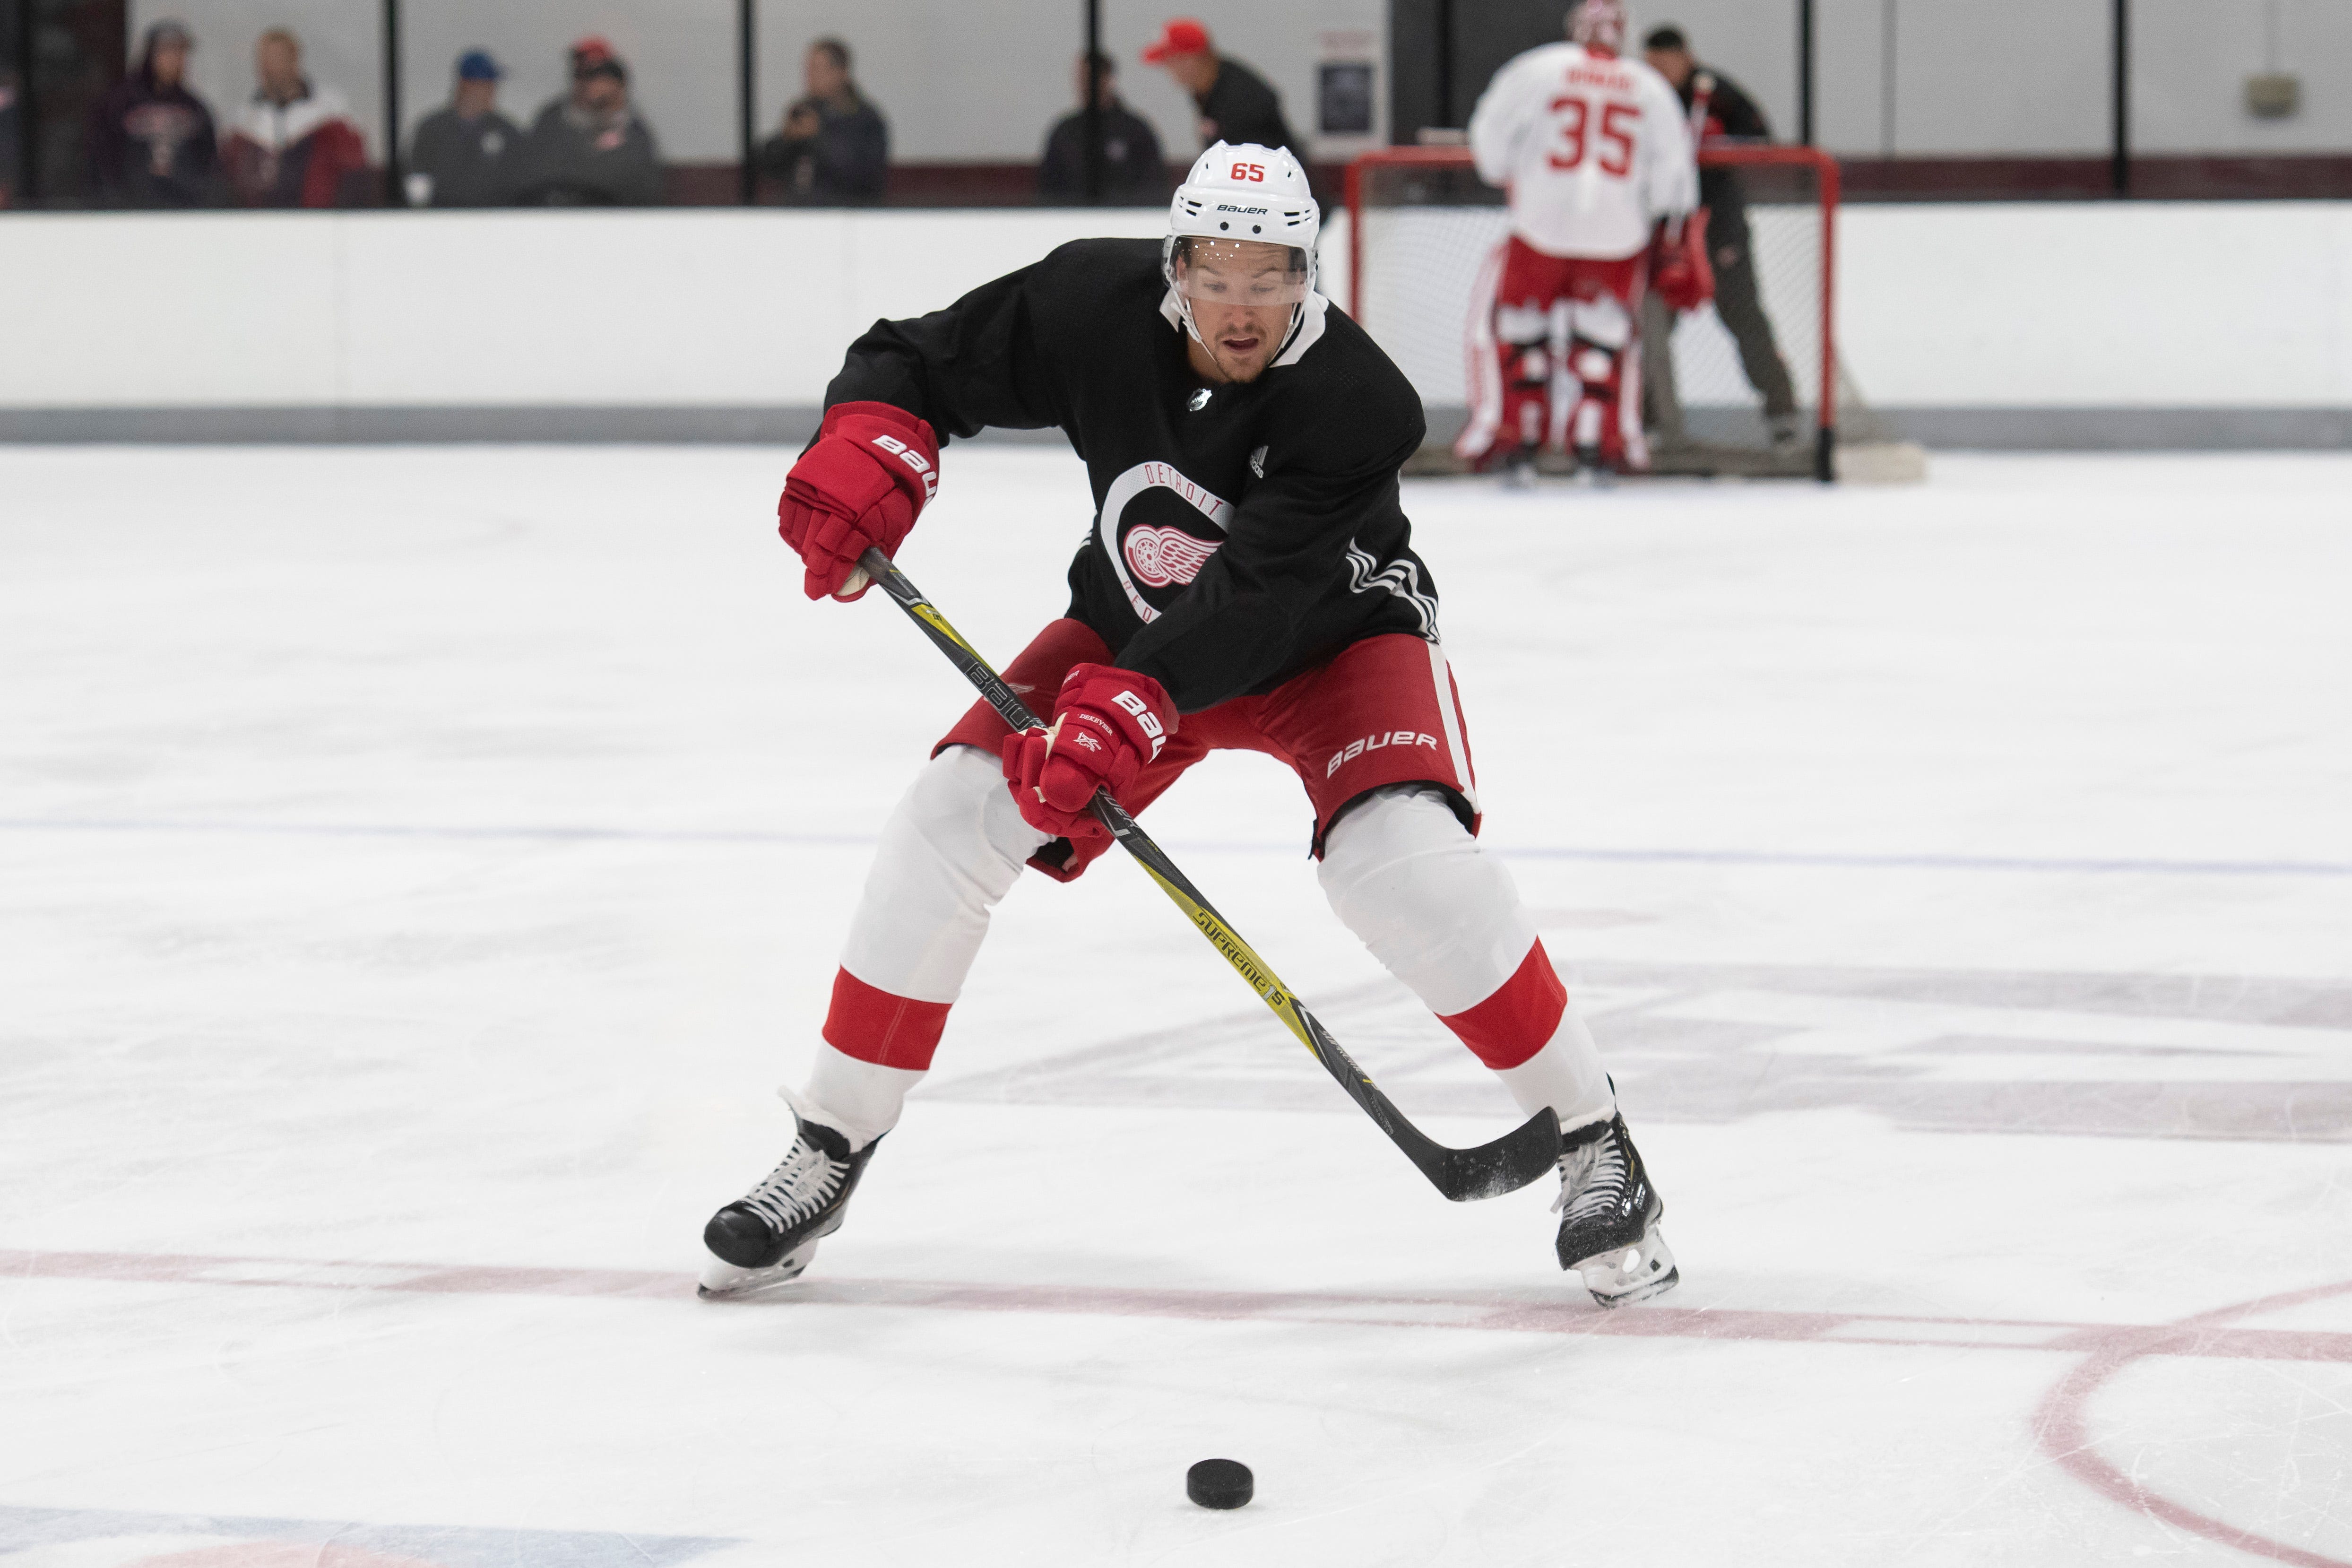 DANNY DEKEYSER: AGE: 28. HT: 6-3. WT: 192. STATS: 65 games, 6 goals, 6 assists, 12 points. ANALYSIS: Played some of his best, most consistent hockey the second half of last season. His veteran presence becomes crucial right now with Wings’ defense marred with injuries.